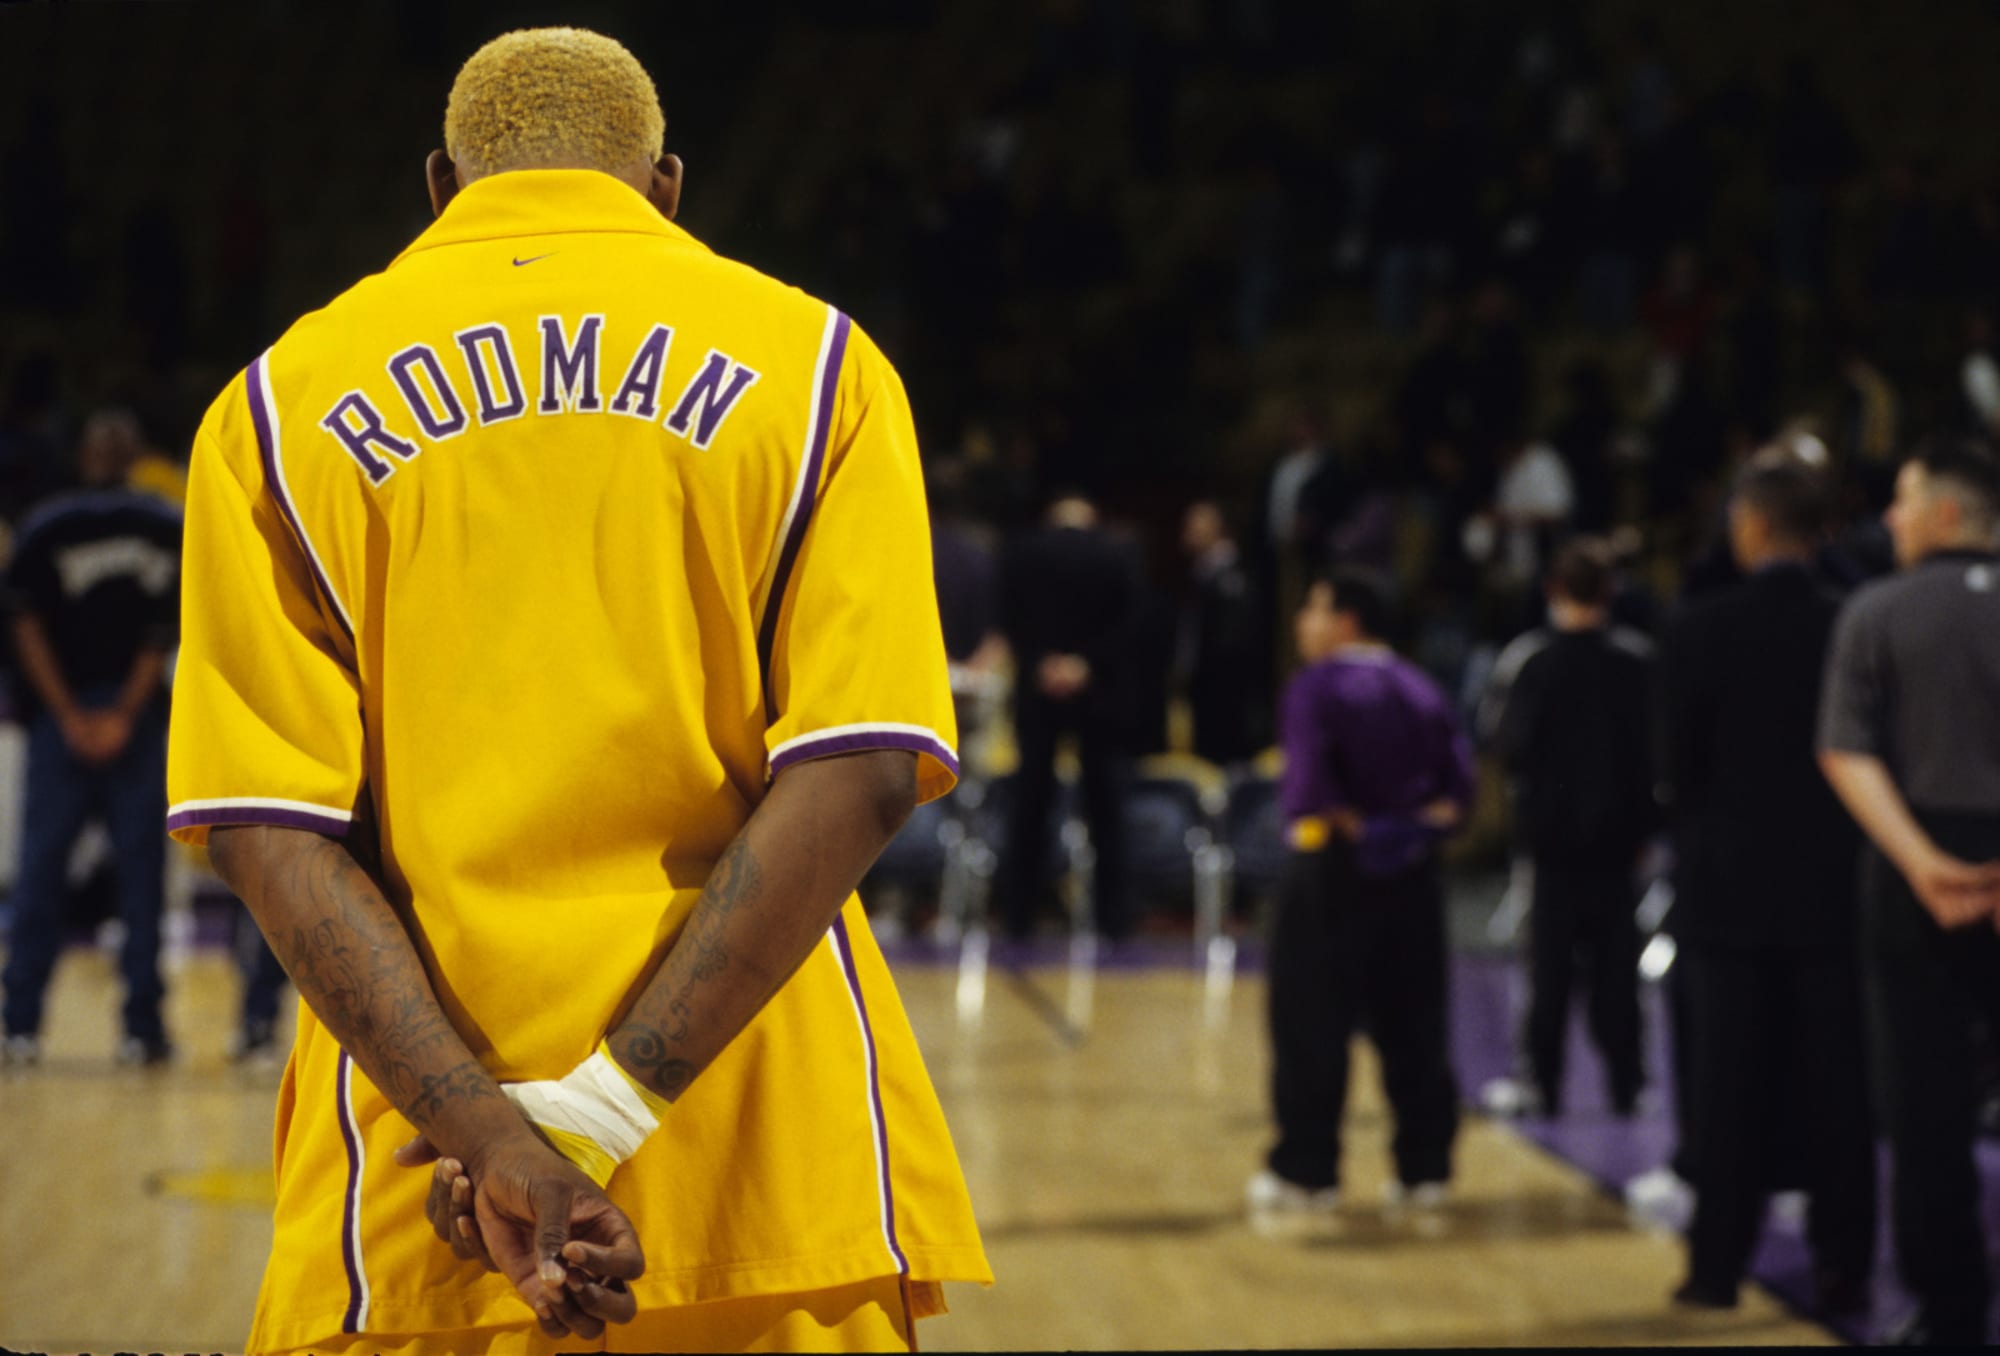 15 stars you might have forgot played for the Los Angeles Lakers